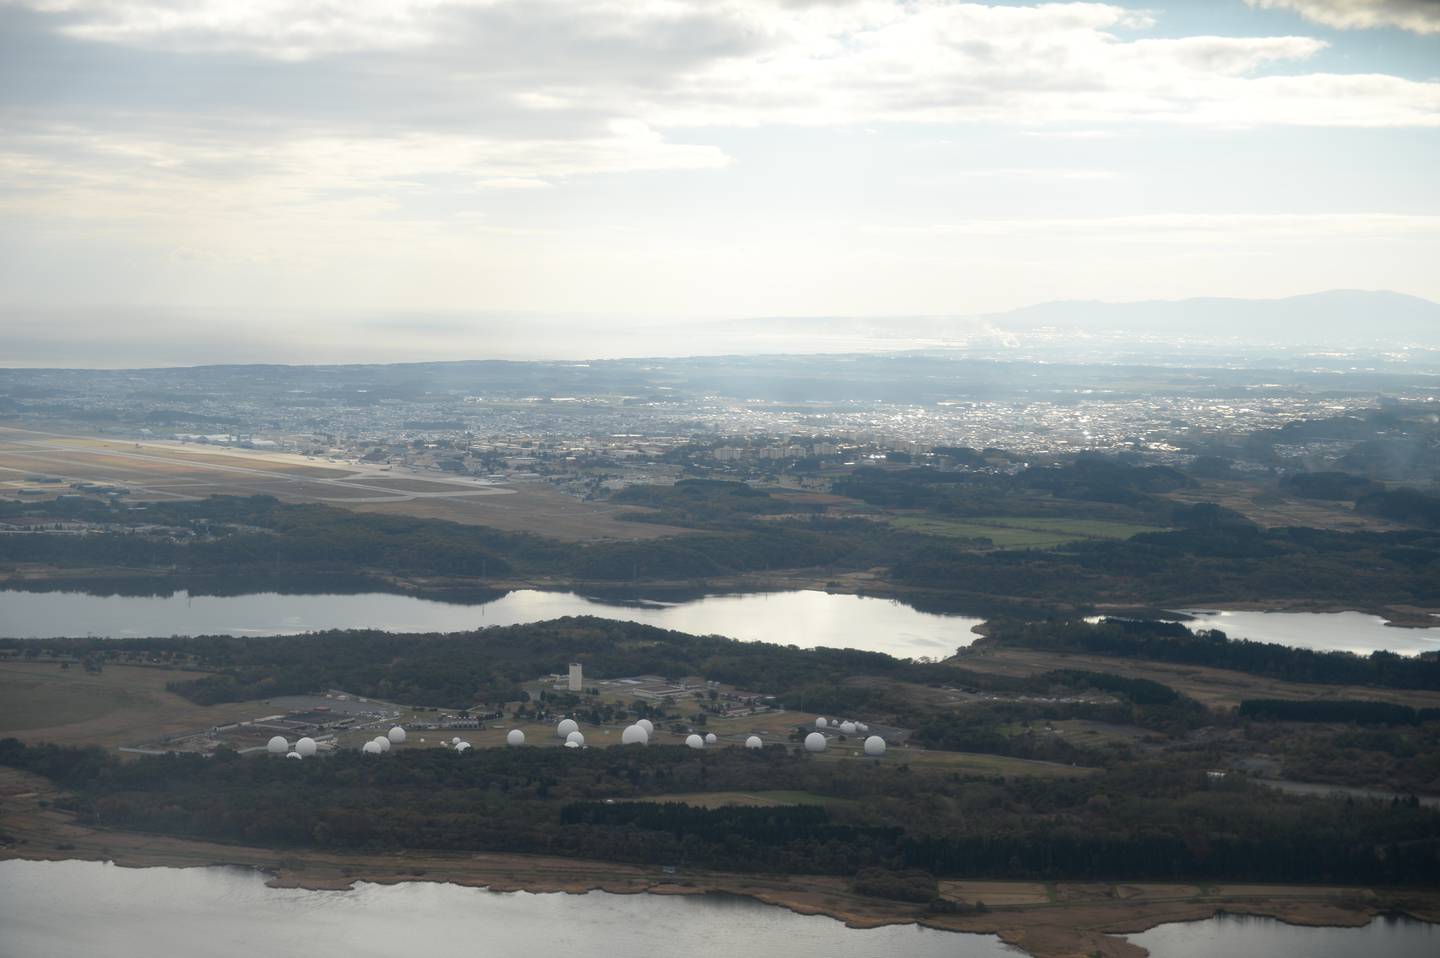 Misawa Airbase, Misawa, Japan, as viewed from a P-8A during a mobility flight.